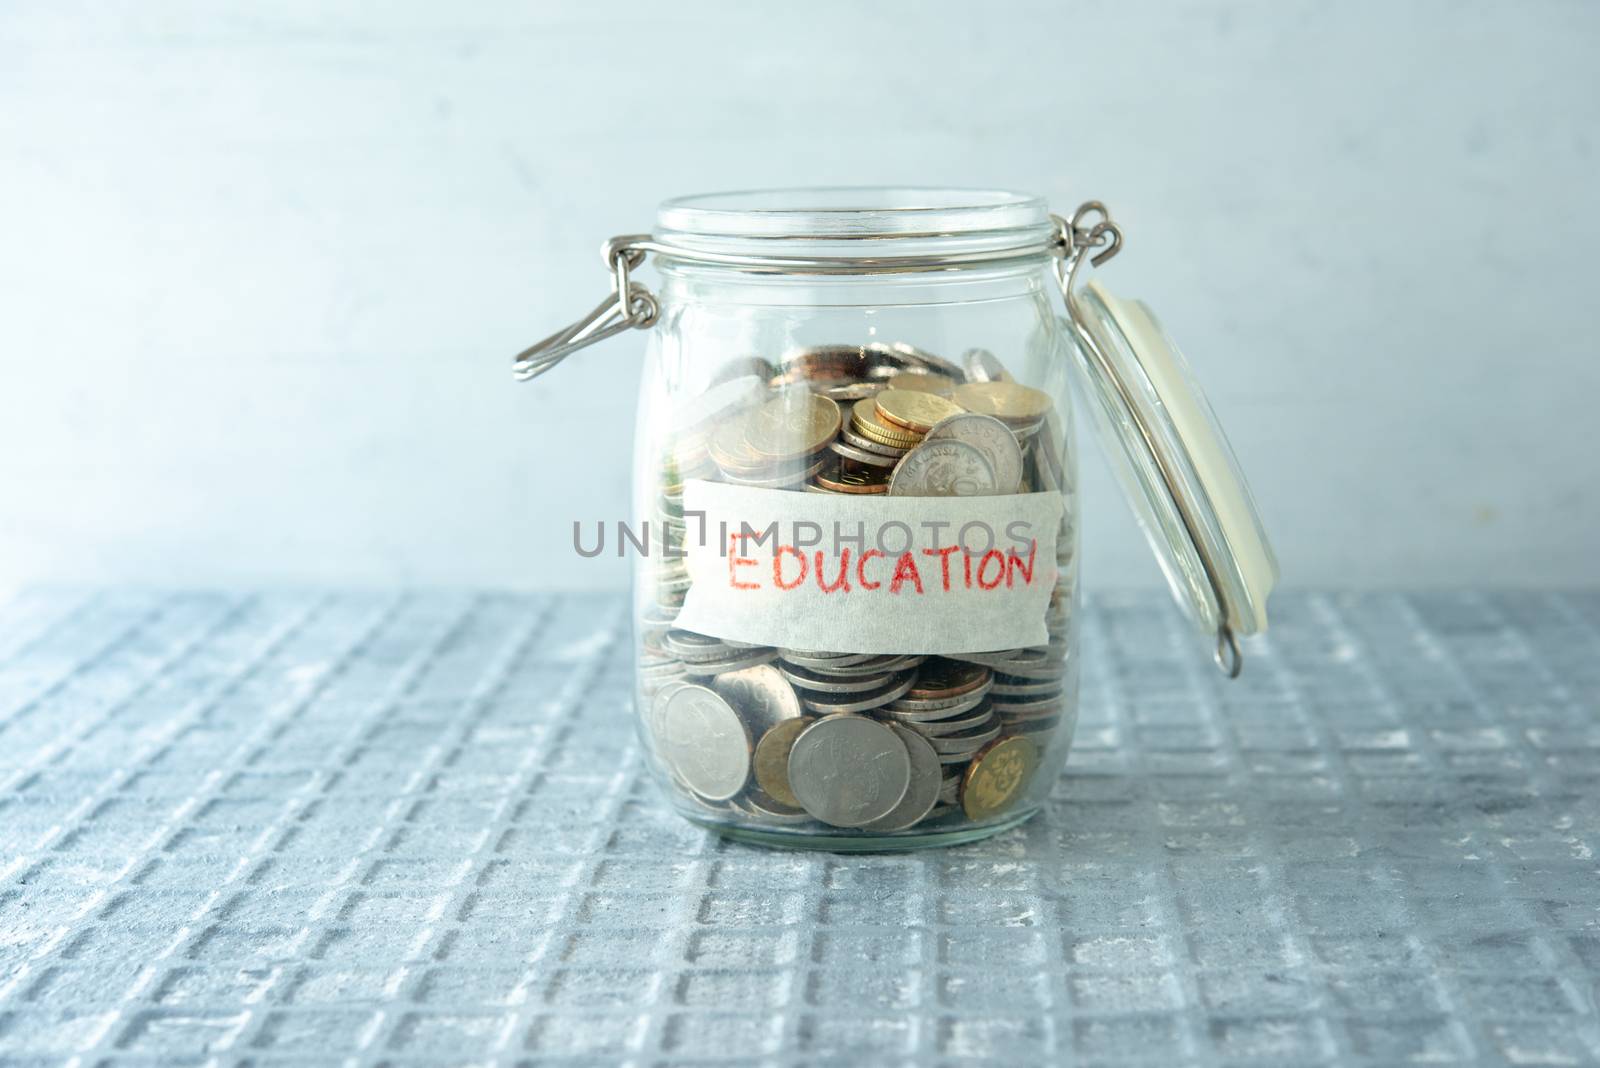 Coins in glass money jar with education label, financial concept.